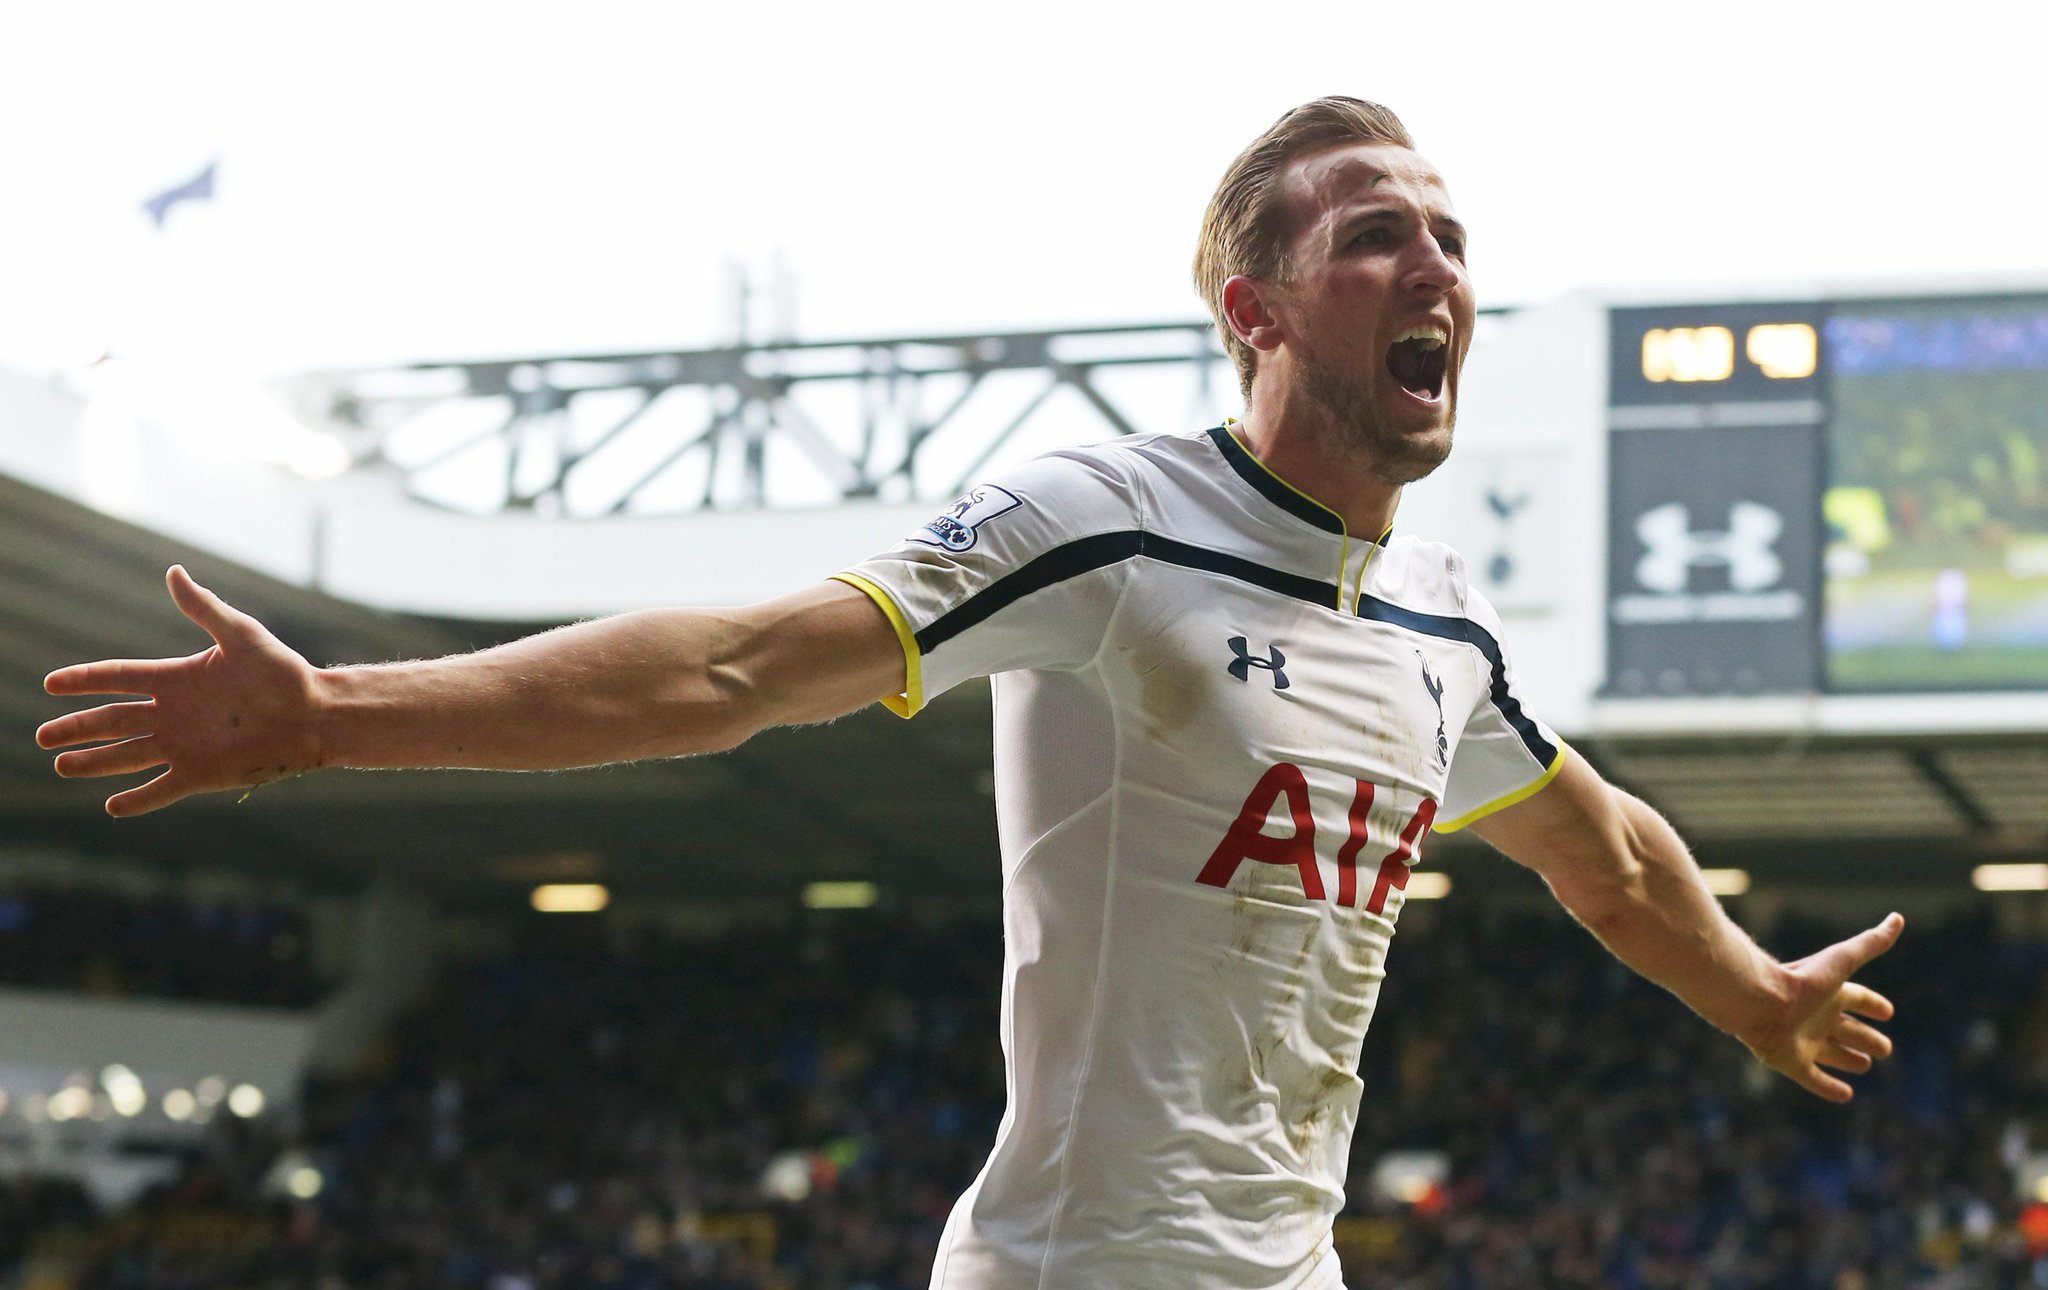 Happy 22nd birthday to Harry Kane. He scored 21 goals and recorded 4 assists in 34 Premier League games last season. 